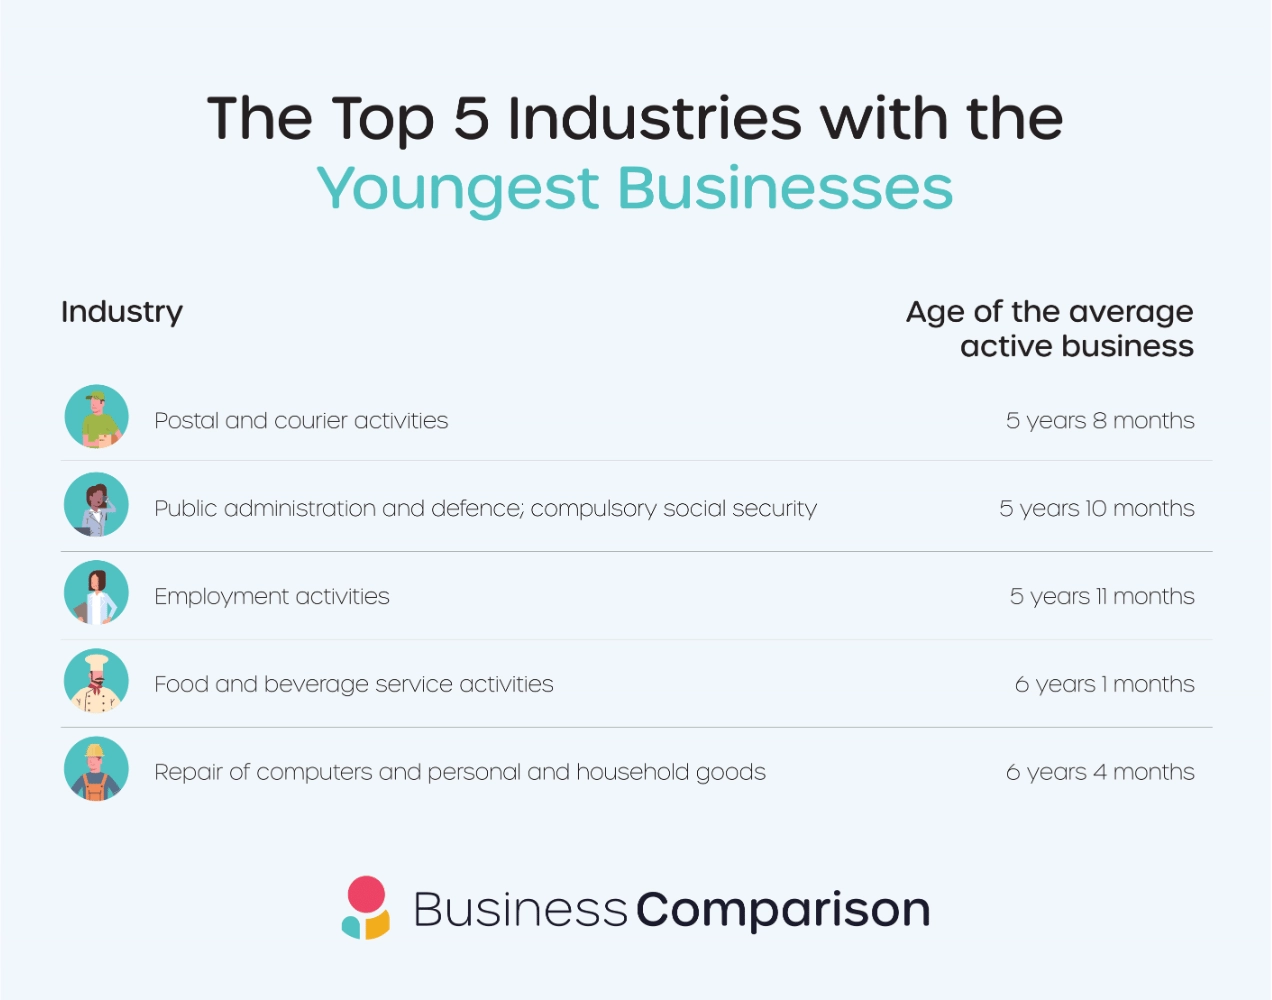 Top 5 industries with the youngest businesses